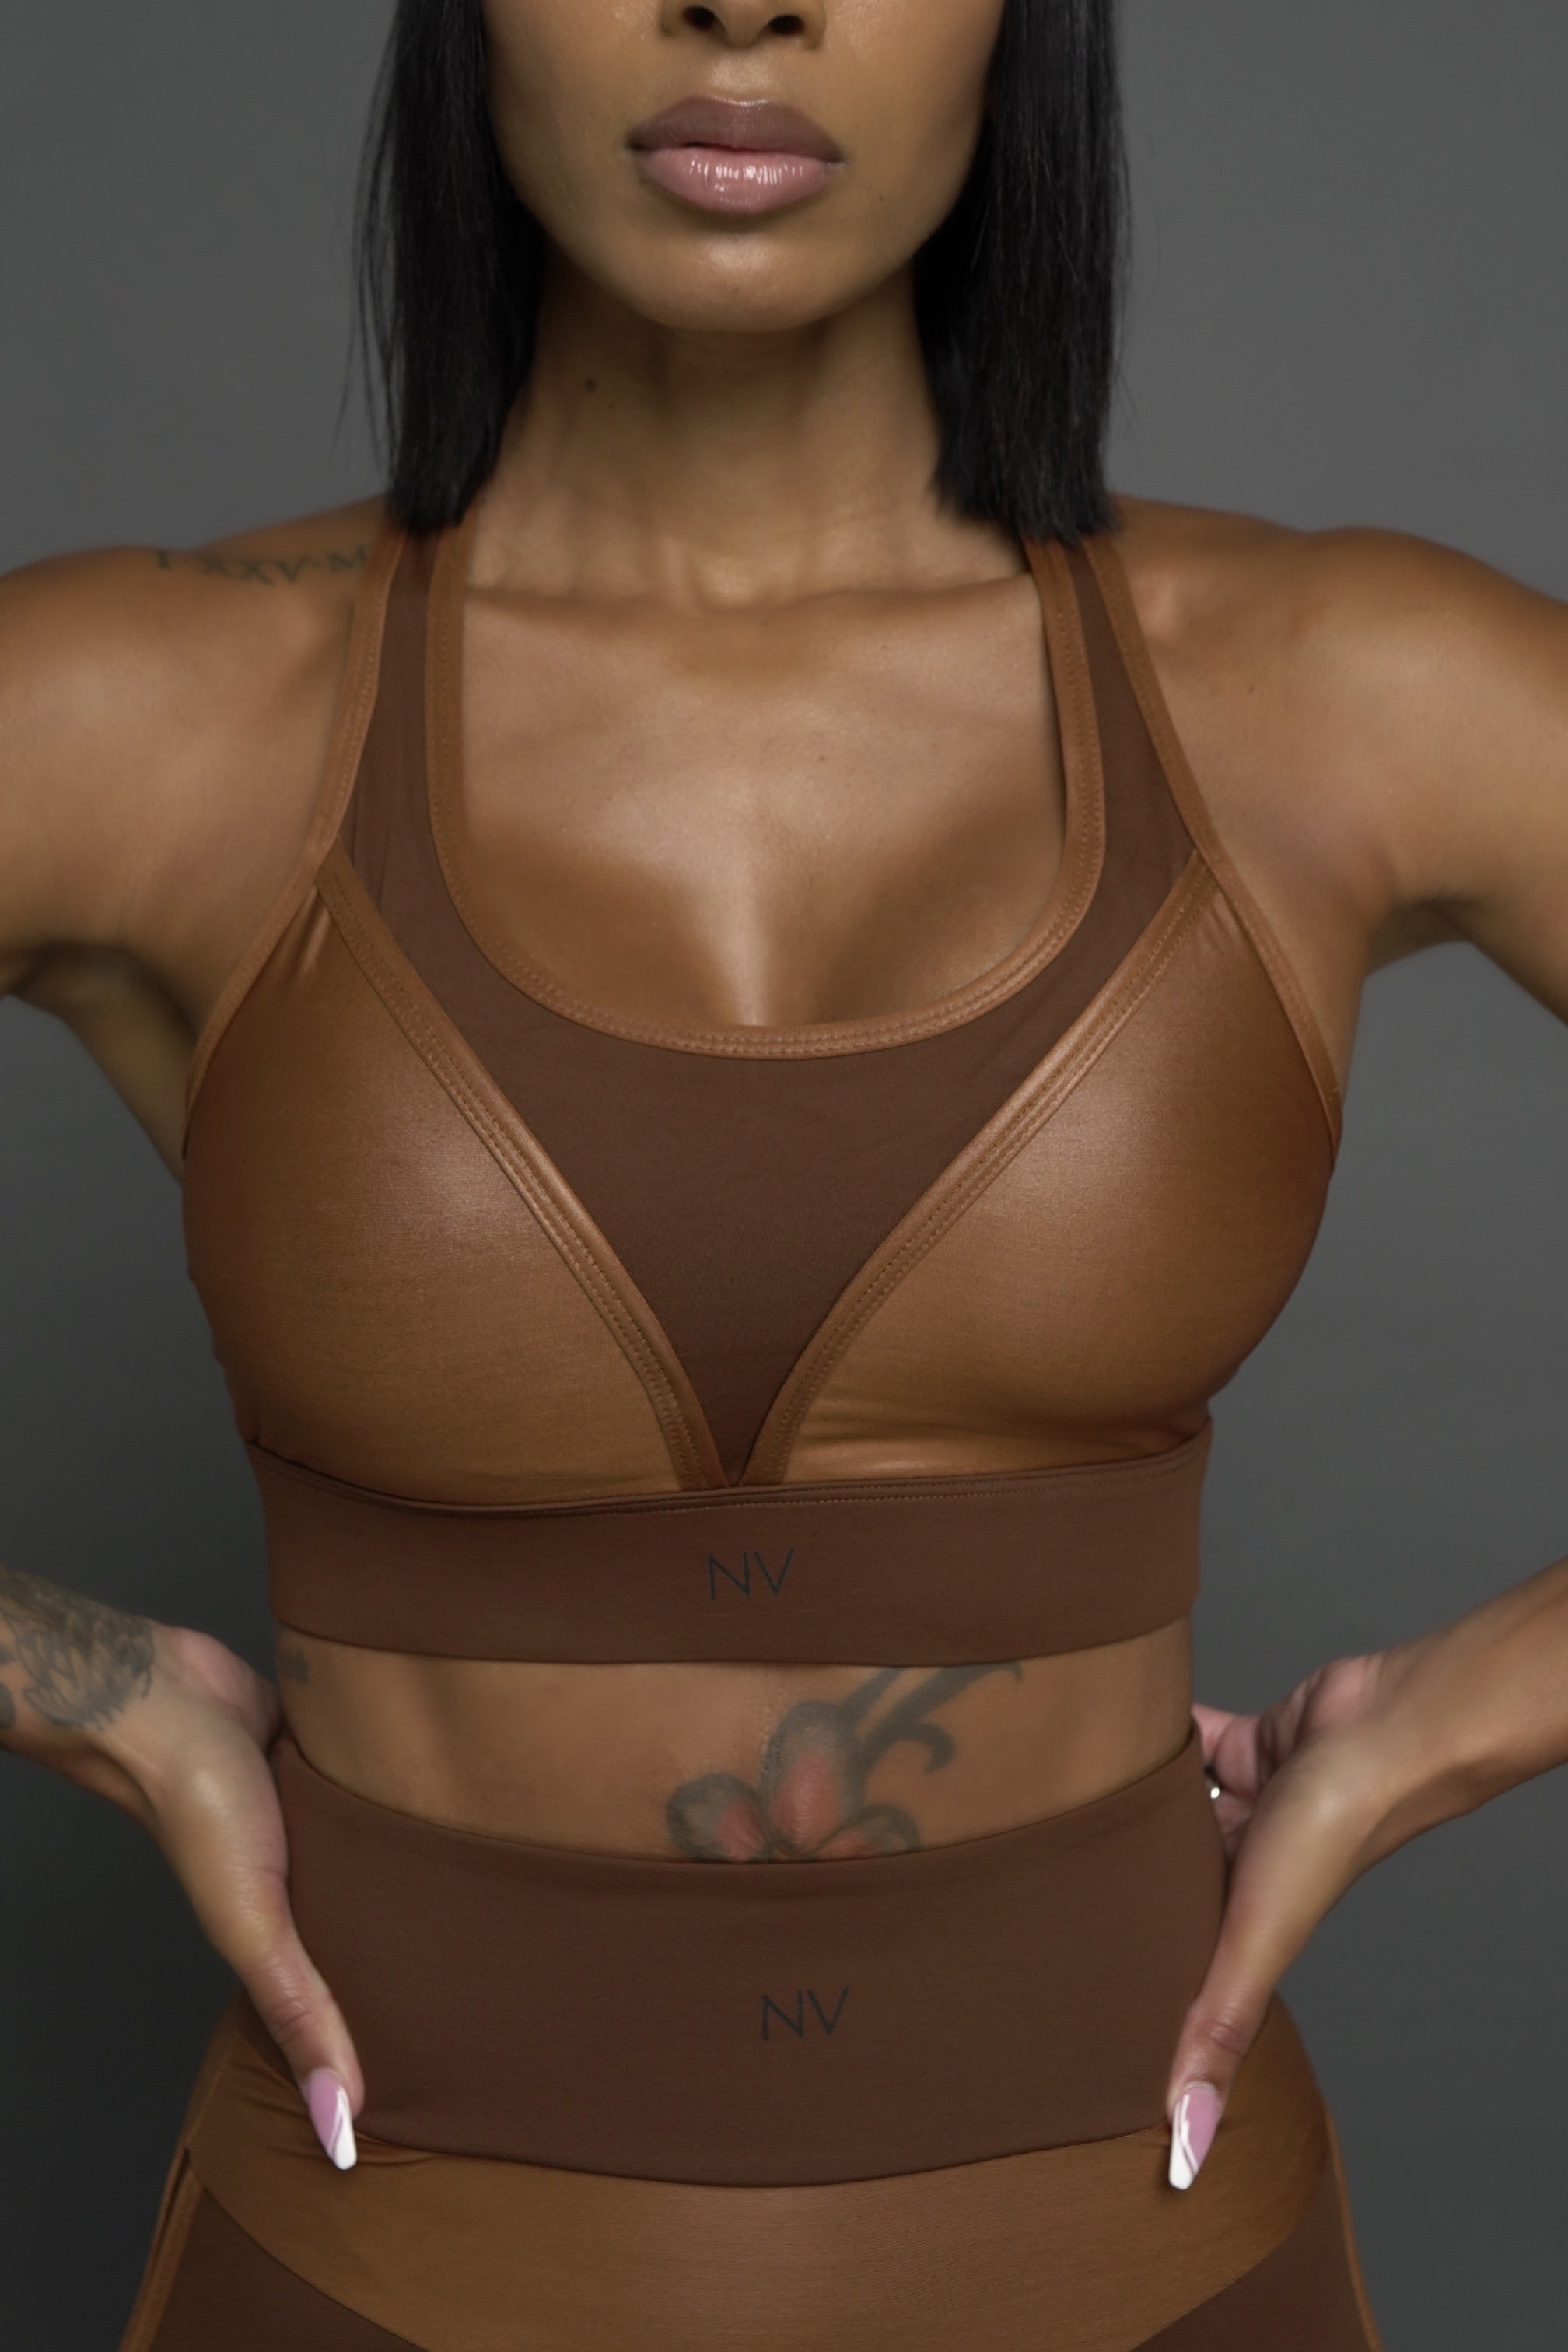 Bodynv - Kind of chilled, but really a big deal😎🔥. Autobiography: Our 1st  exclusive set!! This set features squat-proof leggings paired with a  racerback detailed padded bra. This set has an elastic